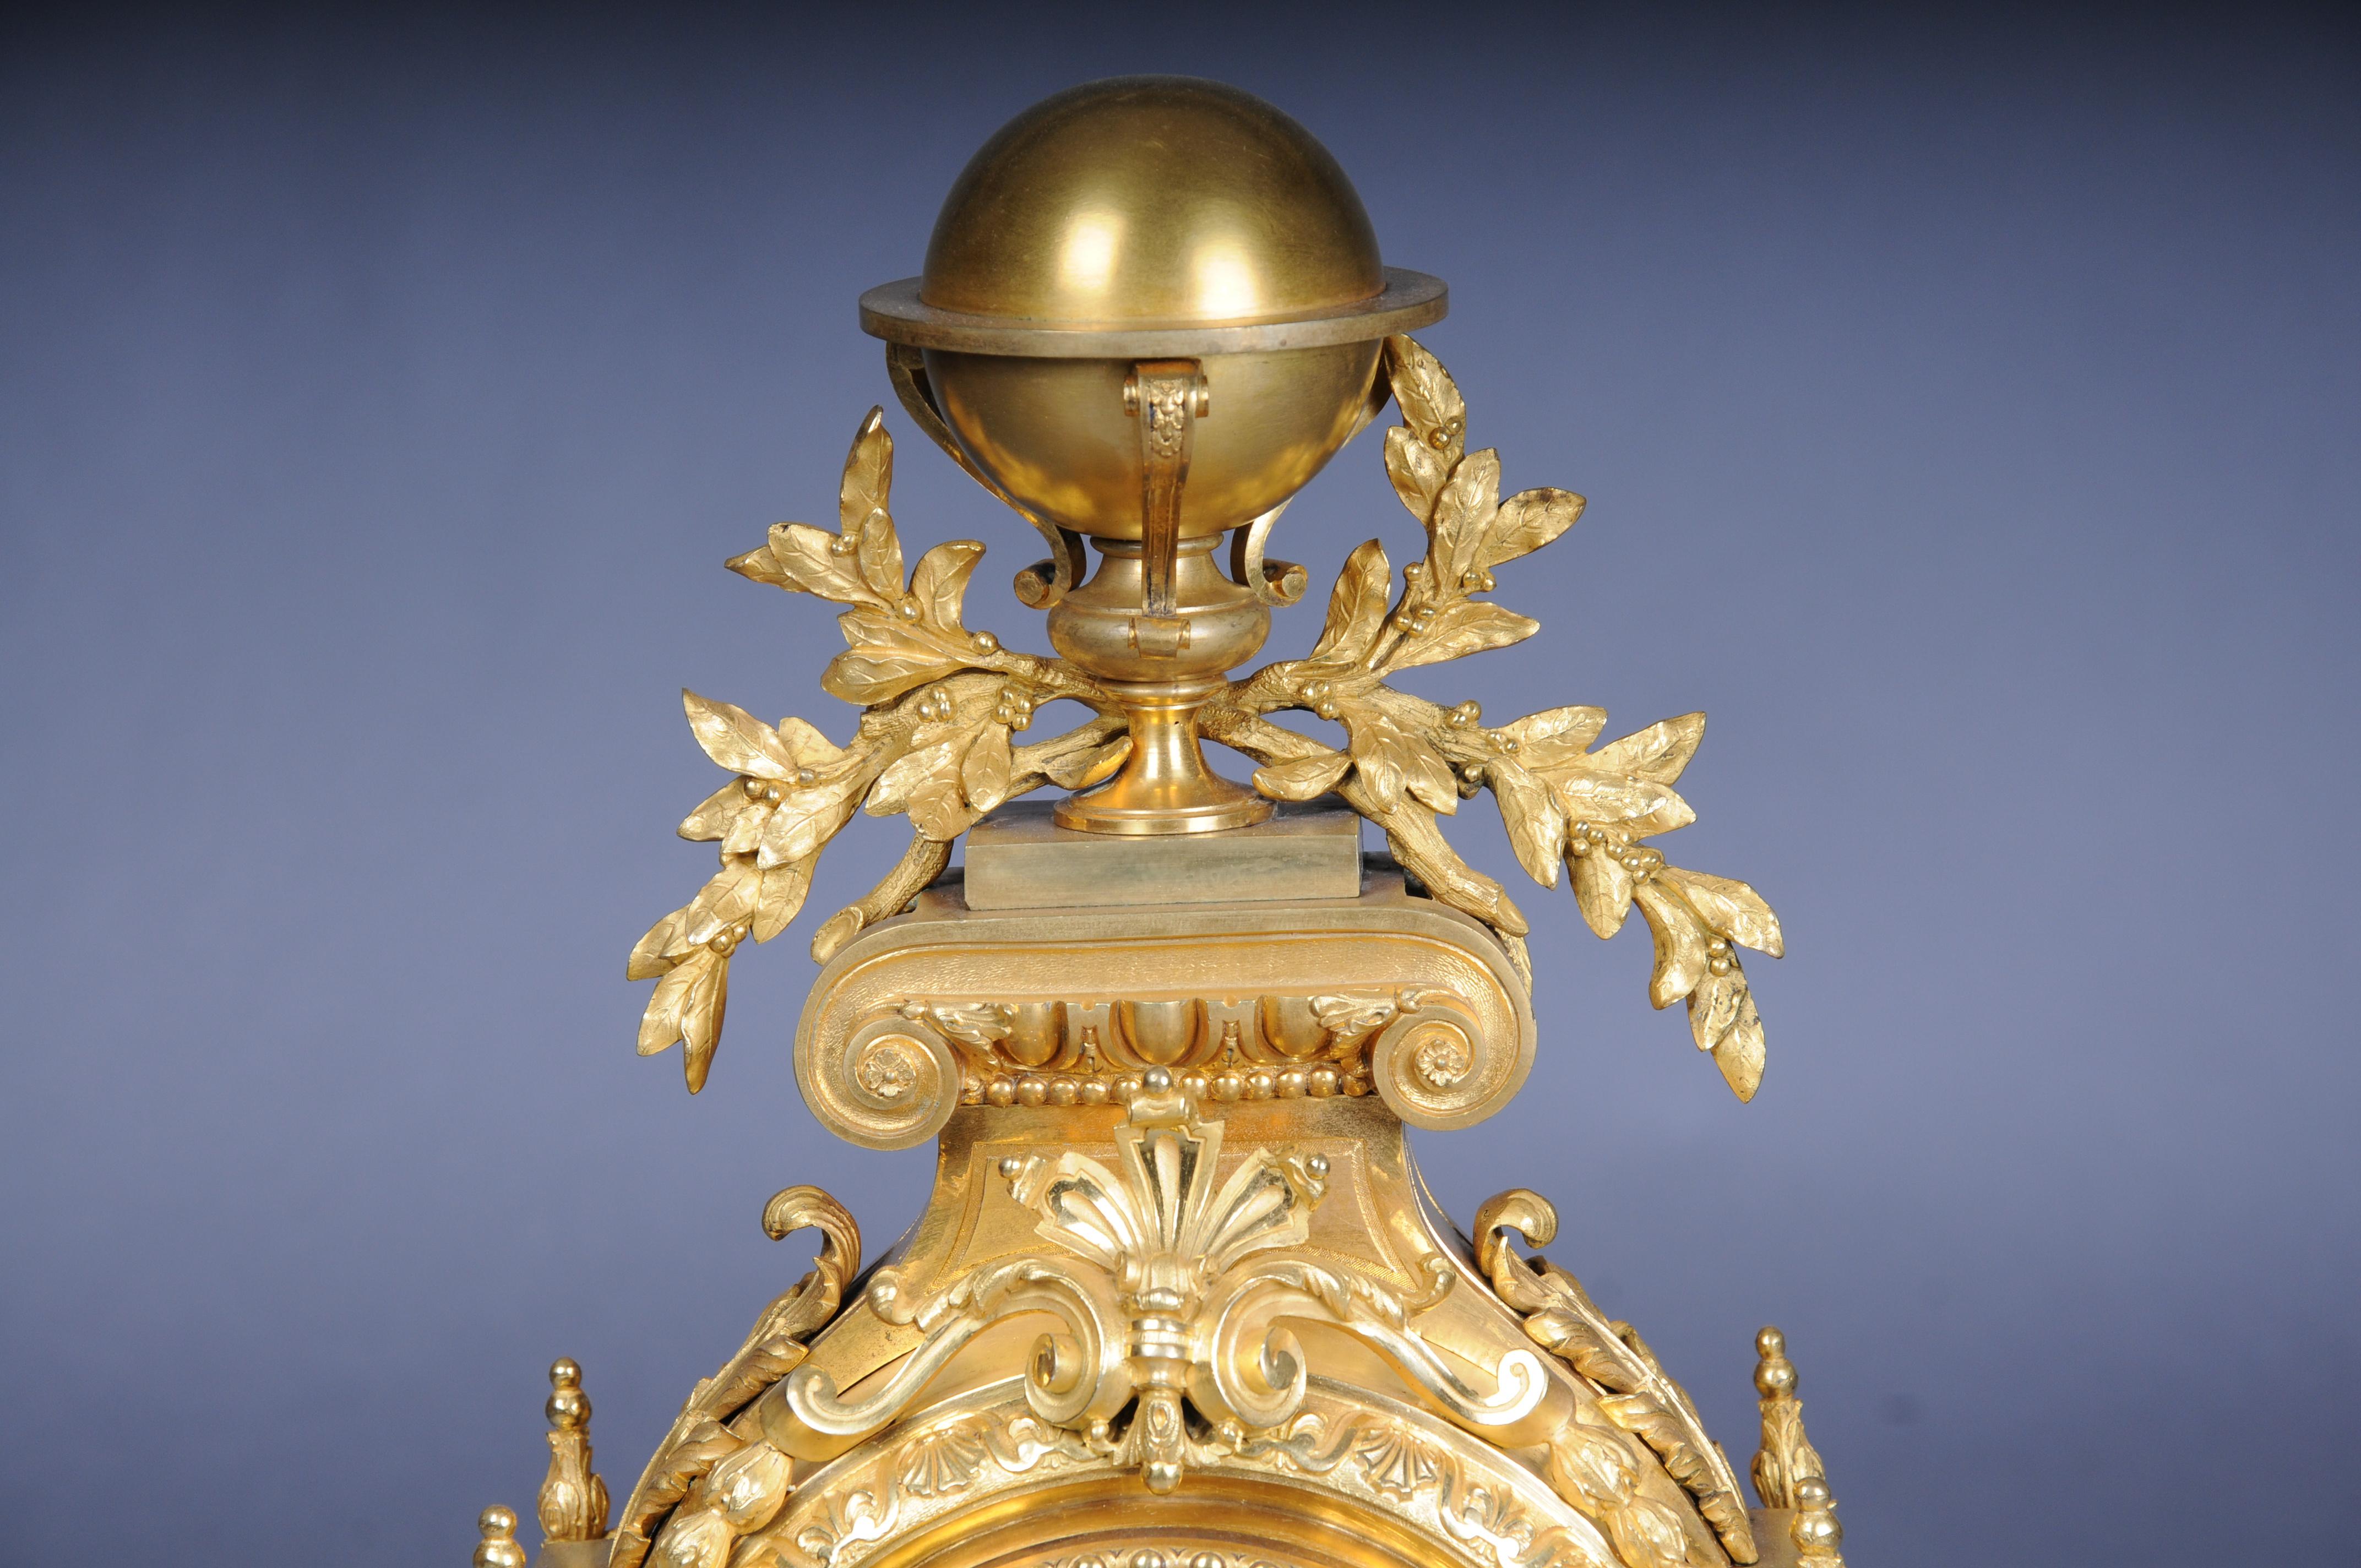 French Royal fire-gilded mantel clock/Pendule Napoleon III, 1870, Paris, signed Lantier For Sale